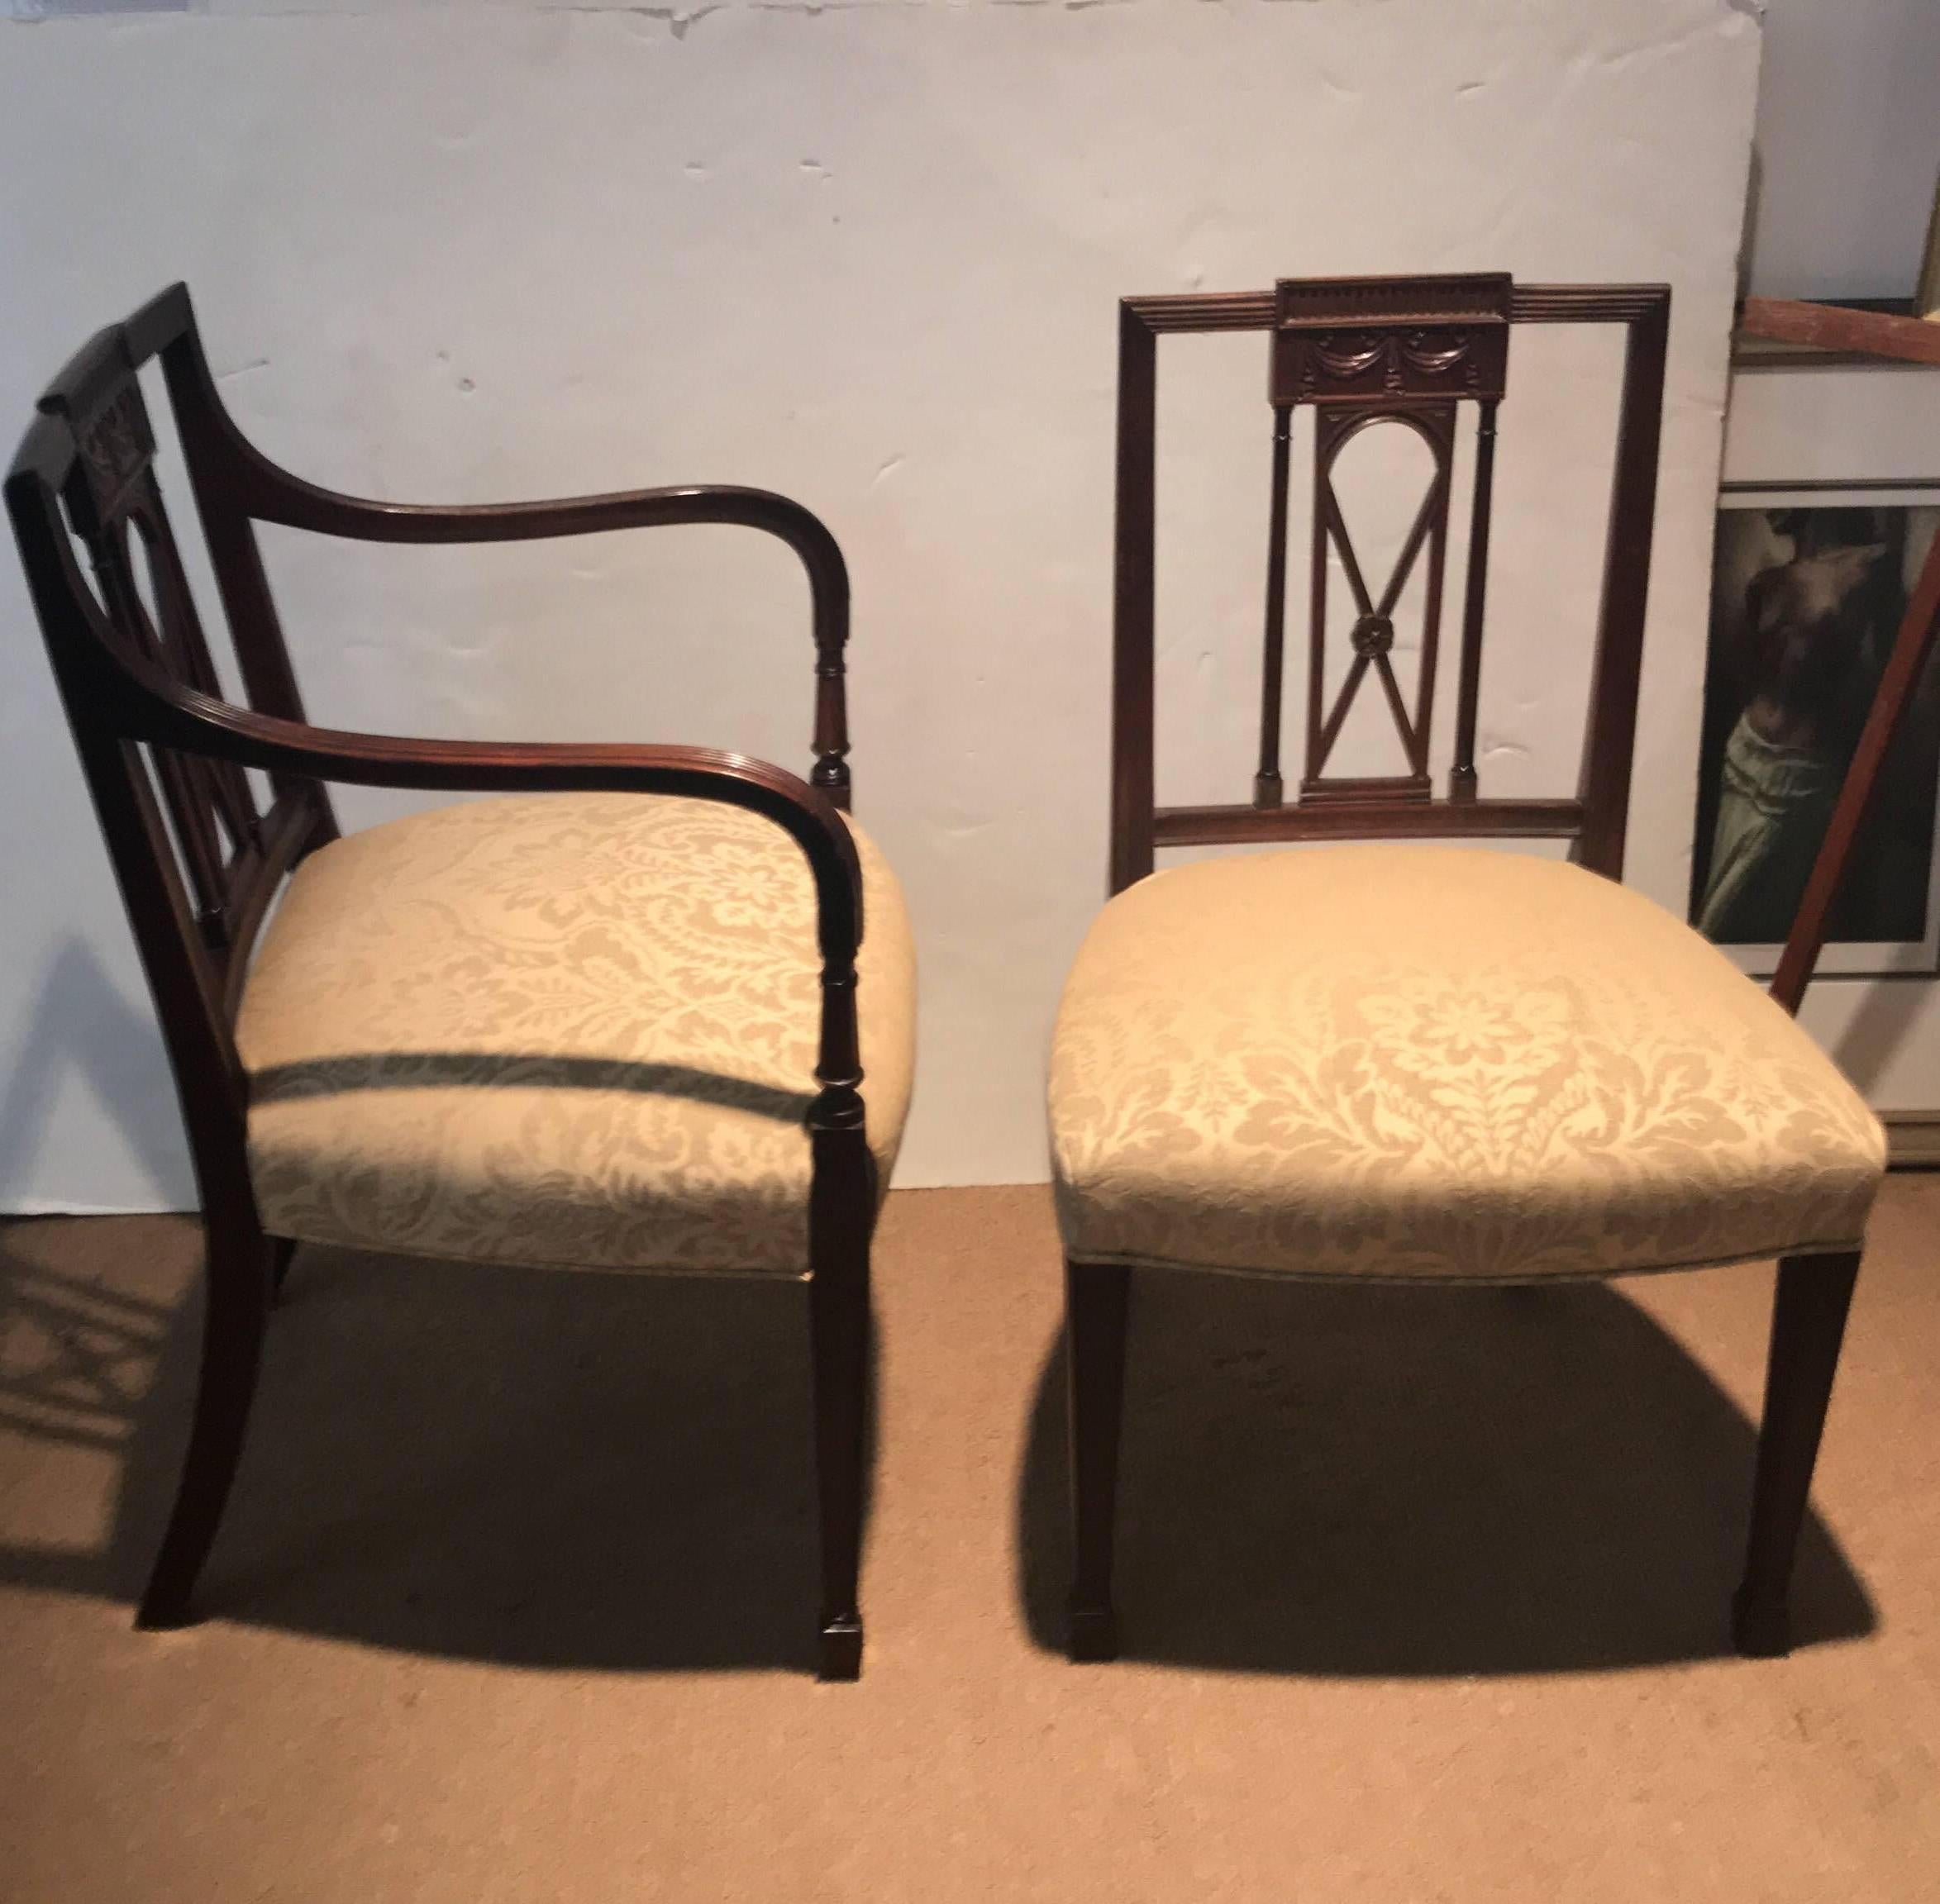 Hand-carved mahogany in a simplified Hepplewhite style in mahogany with new cotton linen damask upholstery. Two armchairs and four side chairs with smaller square backs and hand-carved details. The arm chairs with reeded simple arms. The square legs